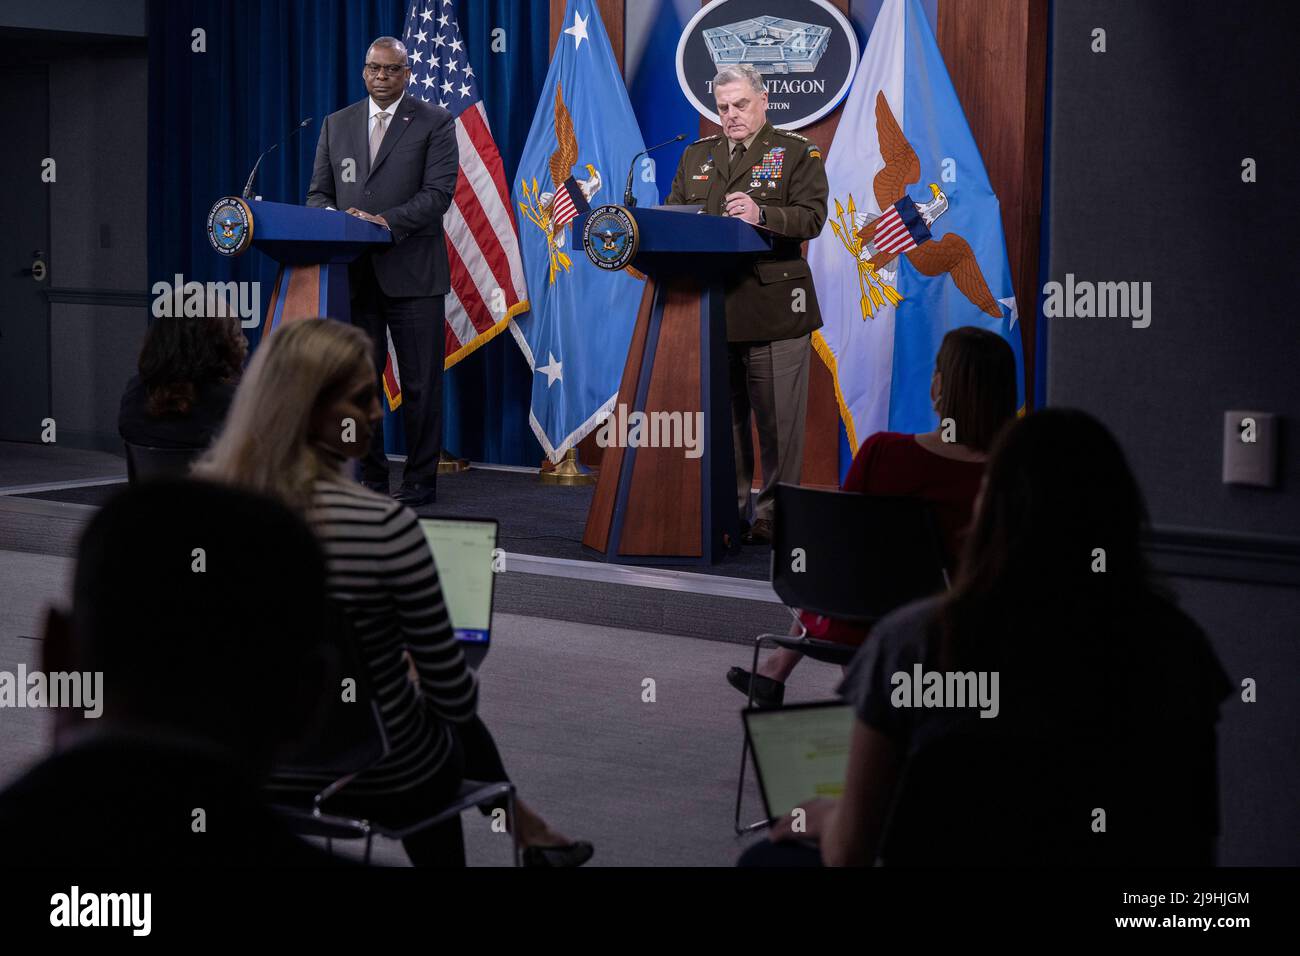 Arlington, United States Of America. 23rd May, 2022. Arlington, United States of America. 23 May, 2022. U.S. Secretary of Defense Lloyd Austin, left, and Chairman of the Joint Chiefs Gen. Mark Milley, listen to a question during a press briefing following a Ukrainian Defense Contact Group meeting at the Pentagon, May 23, 2022 in Arlington, Virginia. Credit: TSgt. Jack Sanders/DOD/Alamy Live News Stock Photo